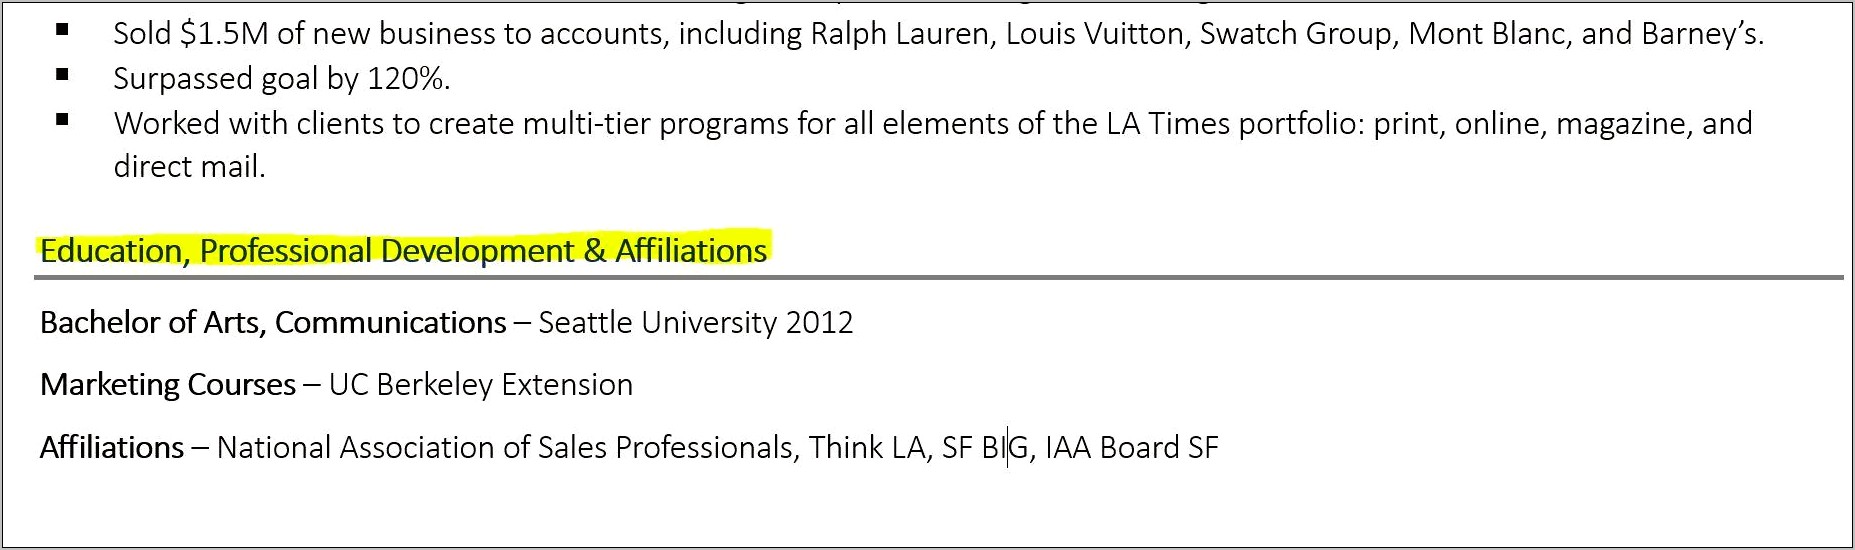 Examples Of Education Section On Resume